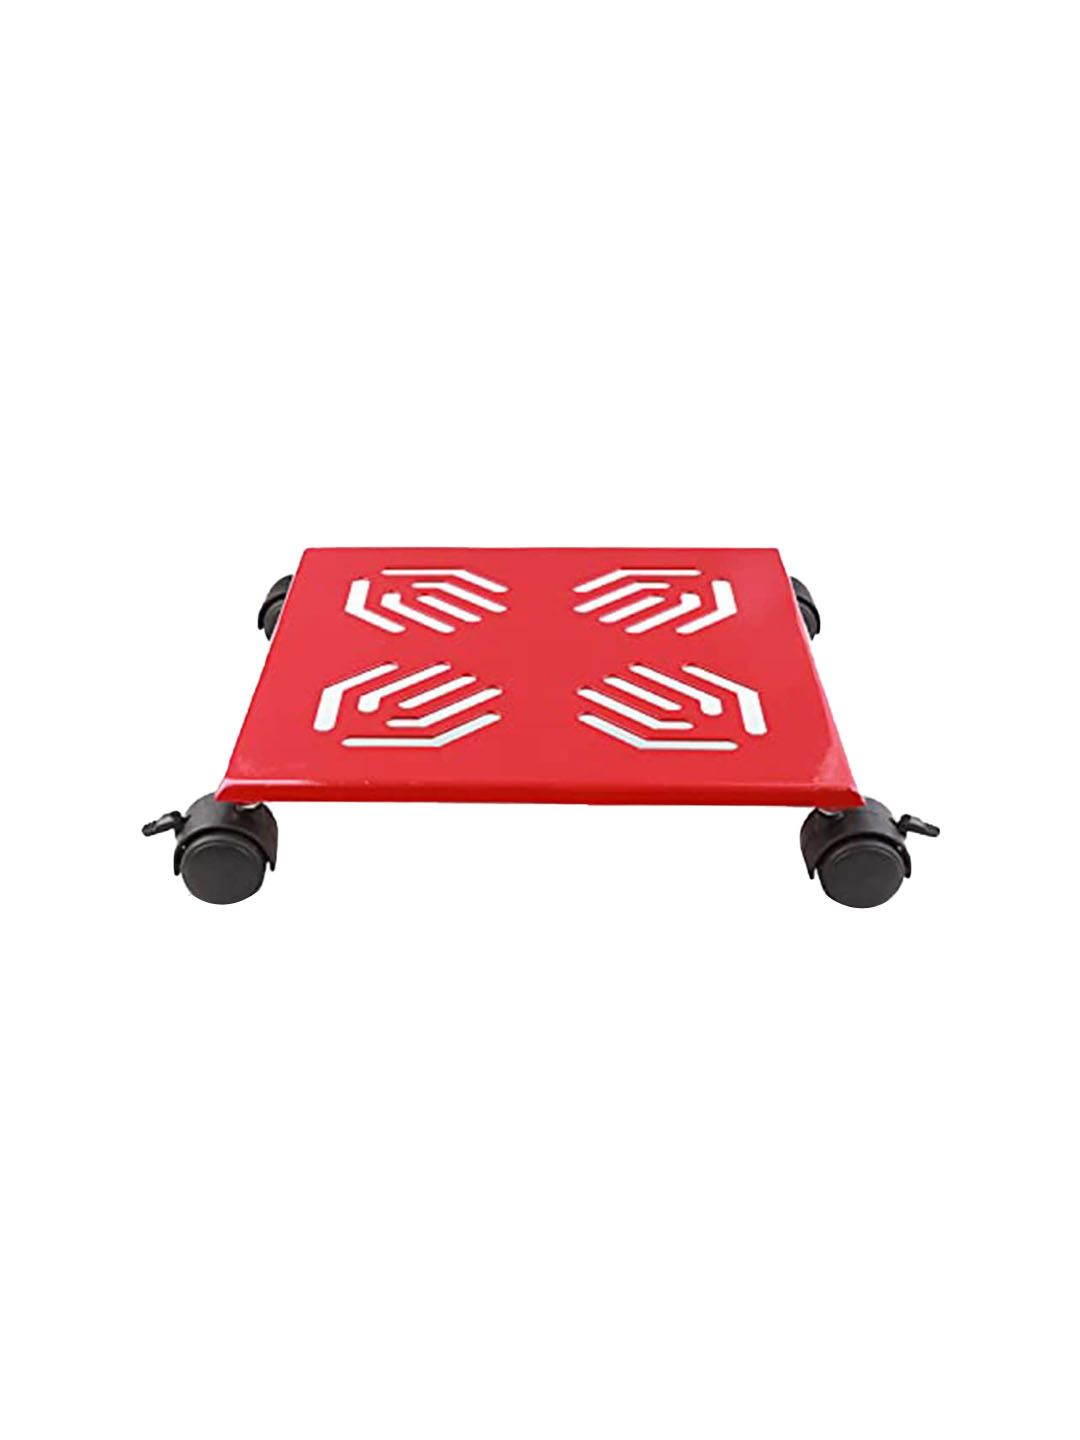 Sharpex Red Solid Iron Square Rack Price in India